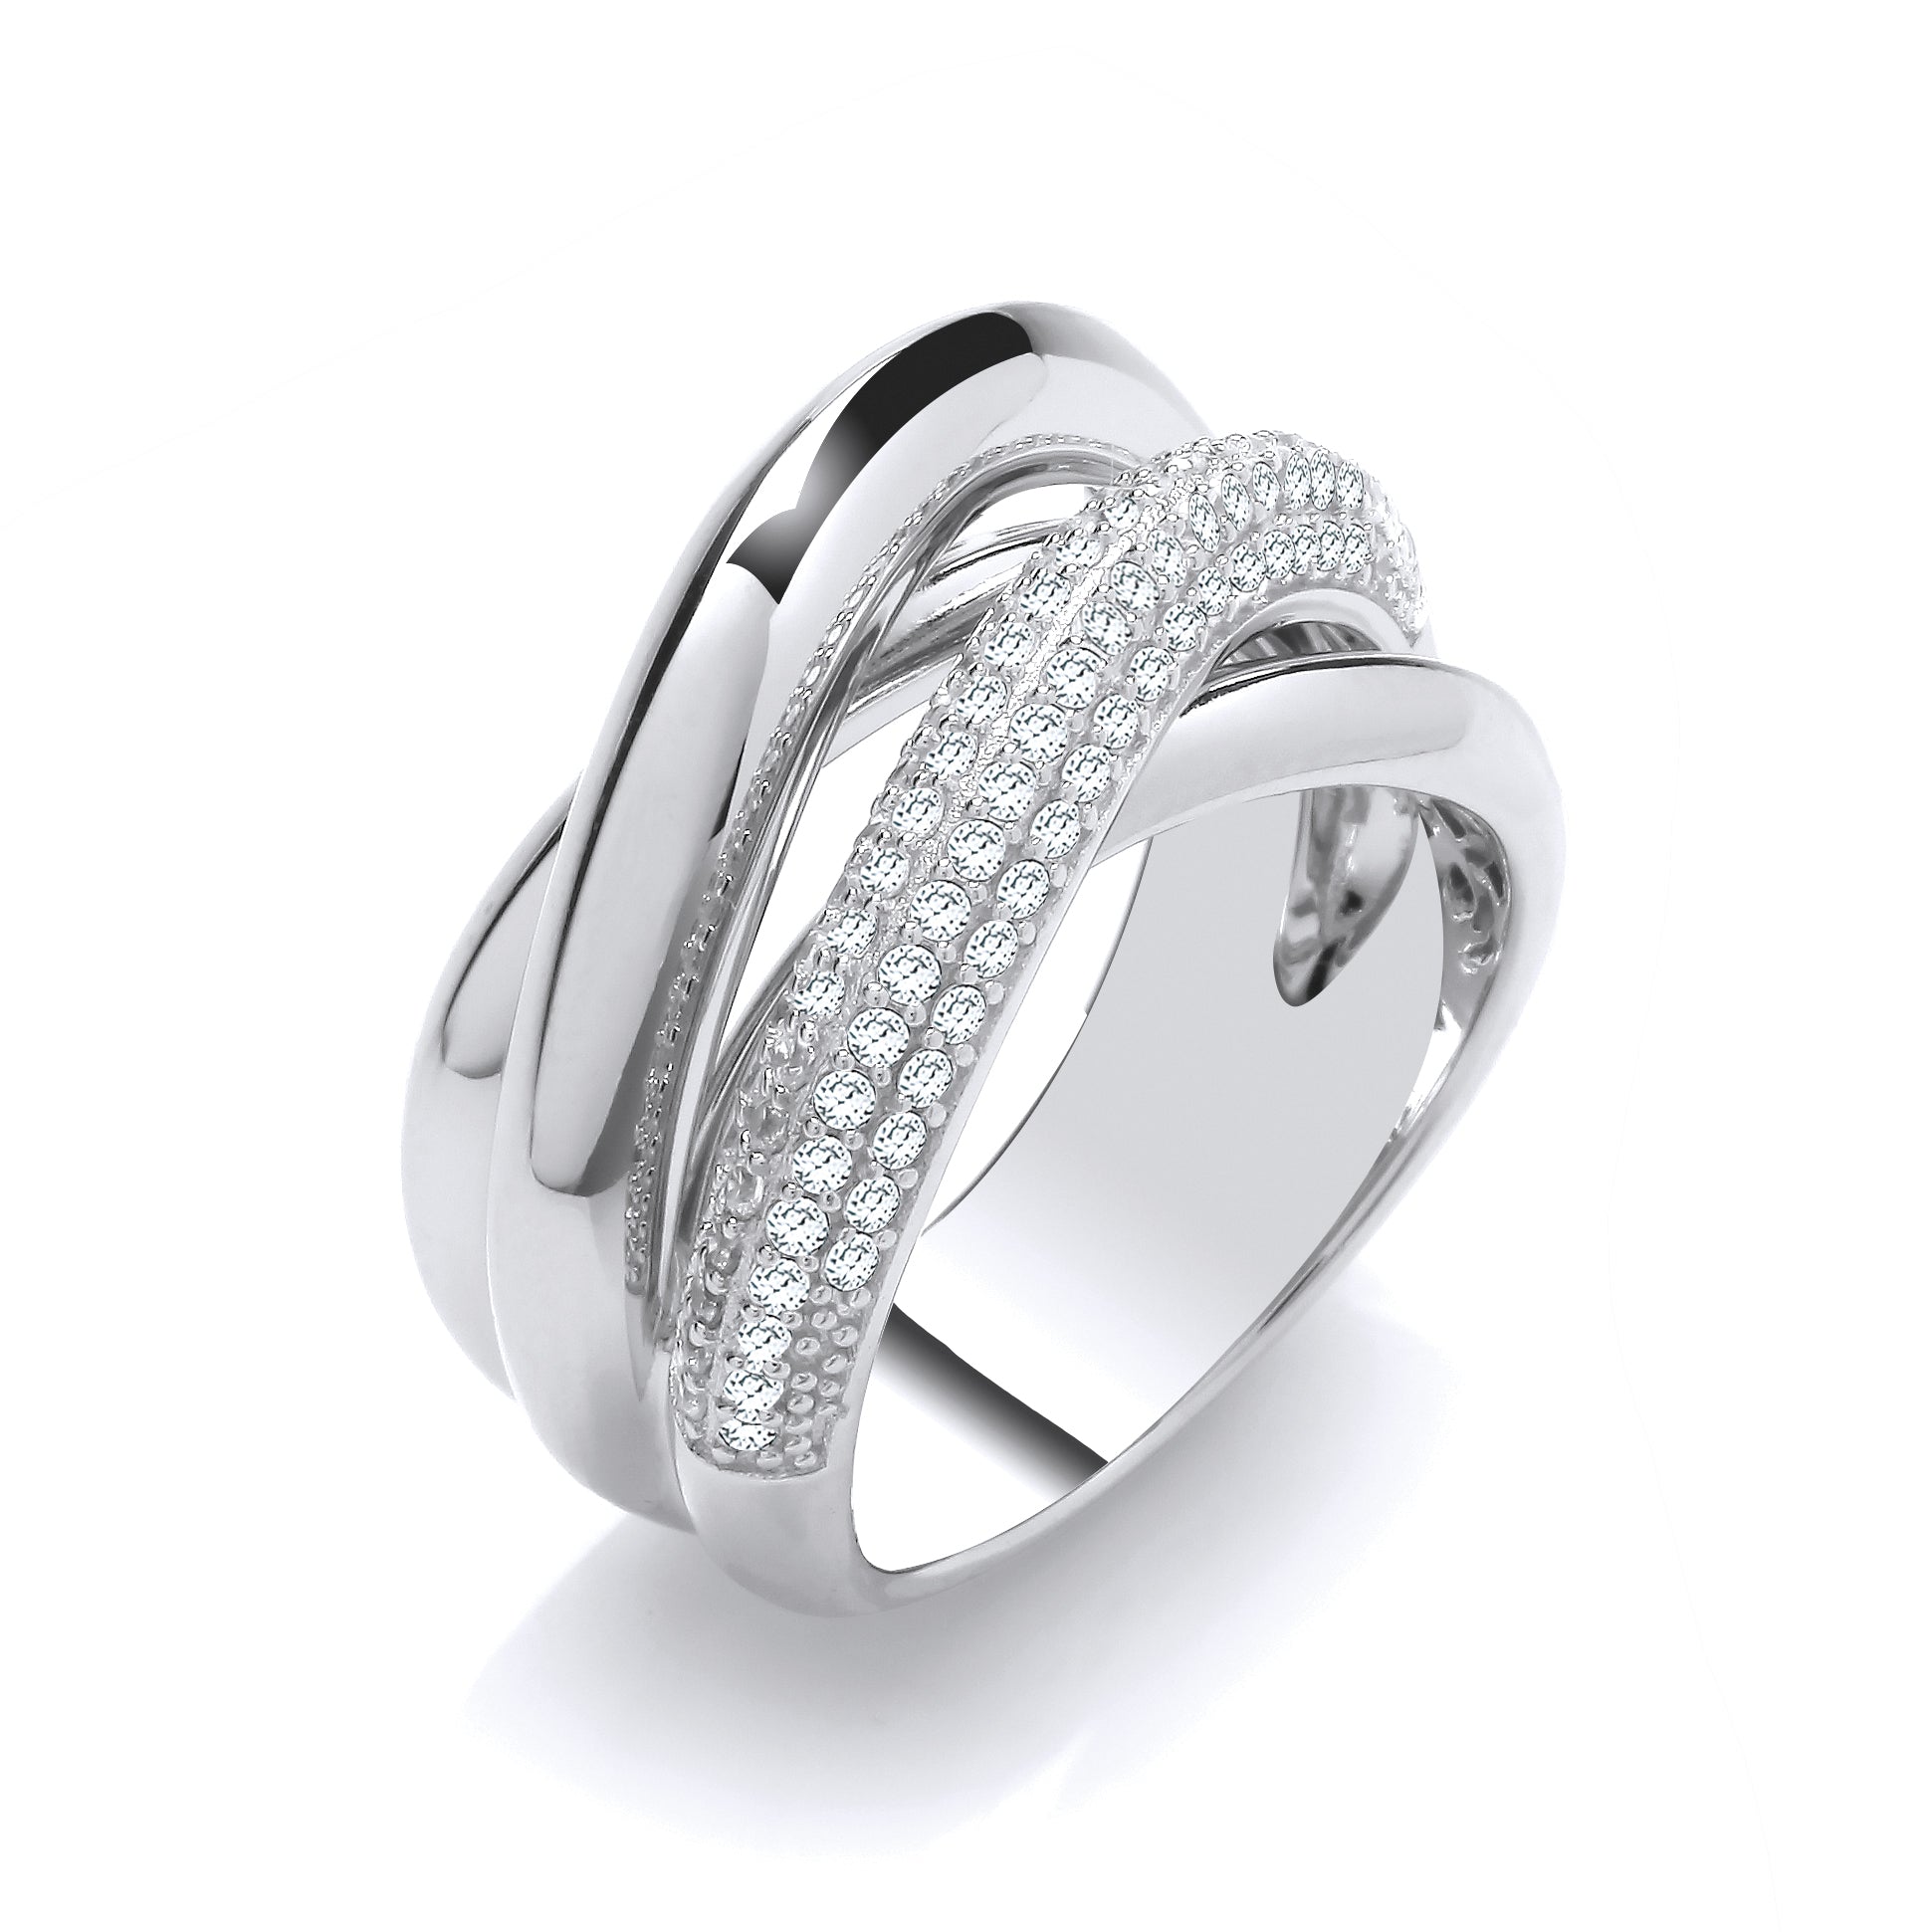 Silver  3 Way Pave Crossover Russian Cocktail Ring - GVR979